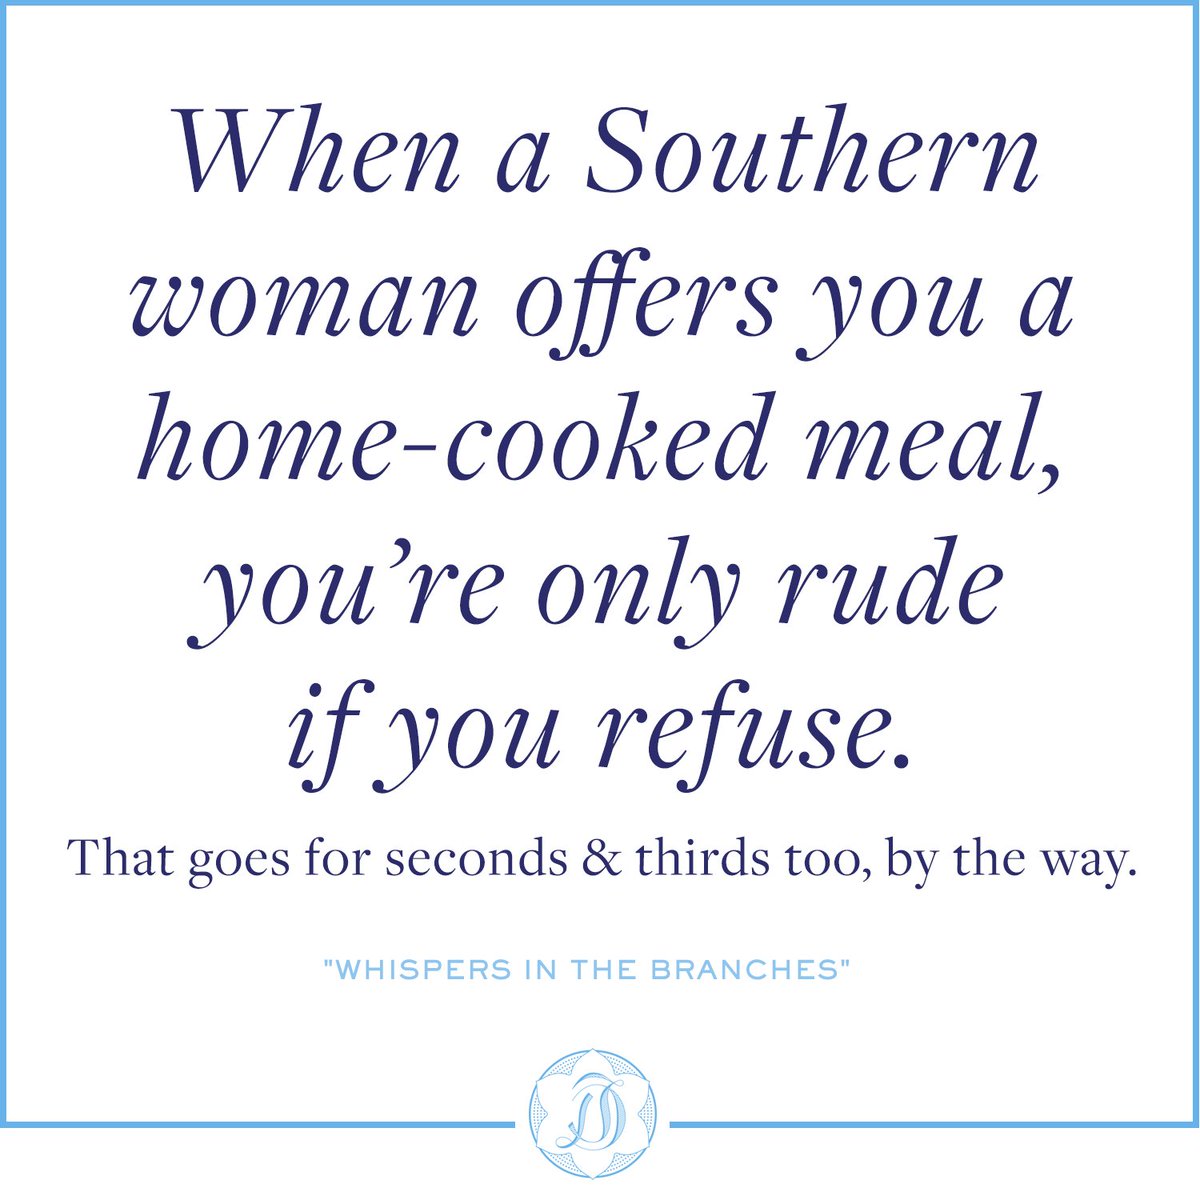 RT @draperjames: One of the most important rules to remember, y'all #southernisms https://t.co/LnrEvUja2j